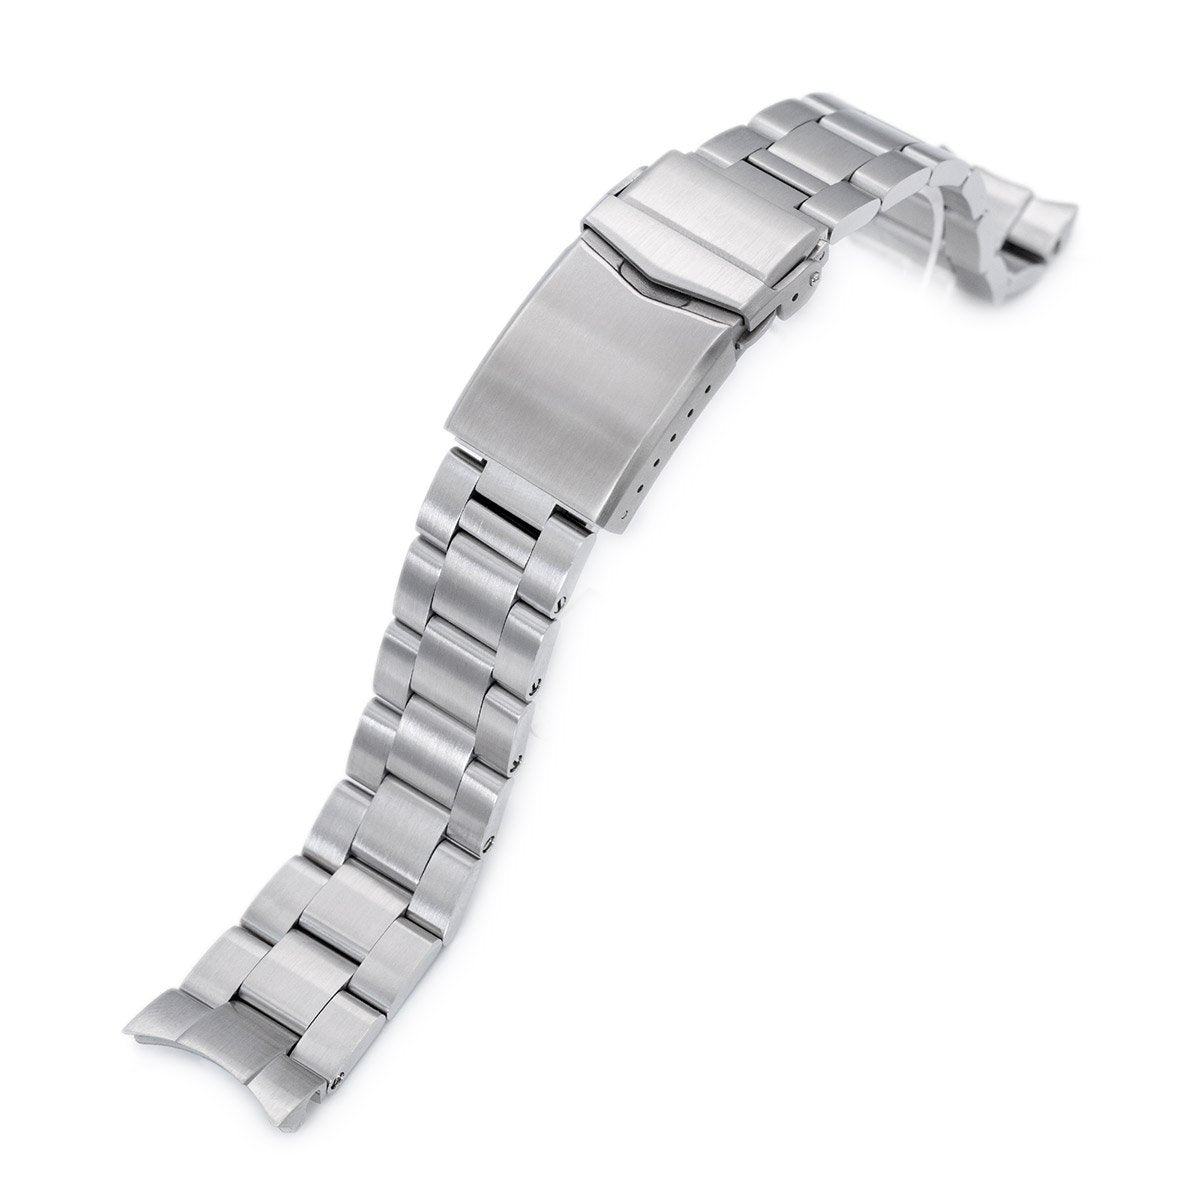 Seiko SARB033 Curved End Replacement Bands | Strapcode